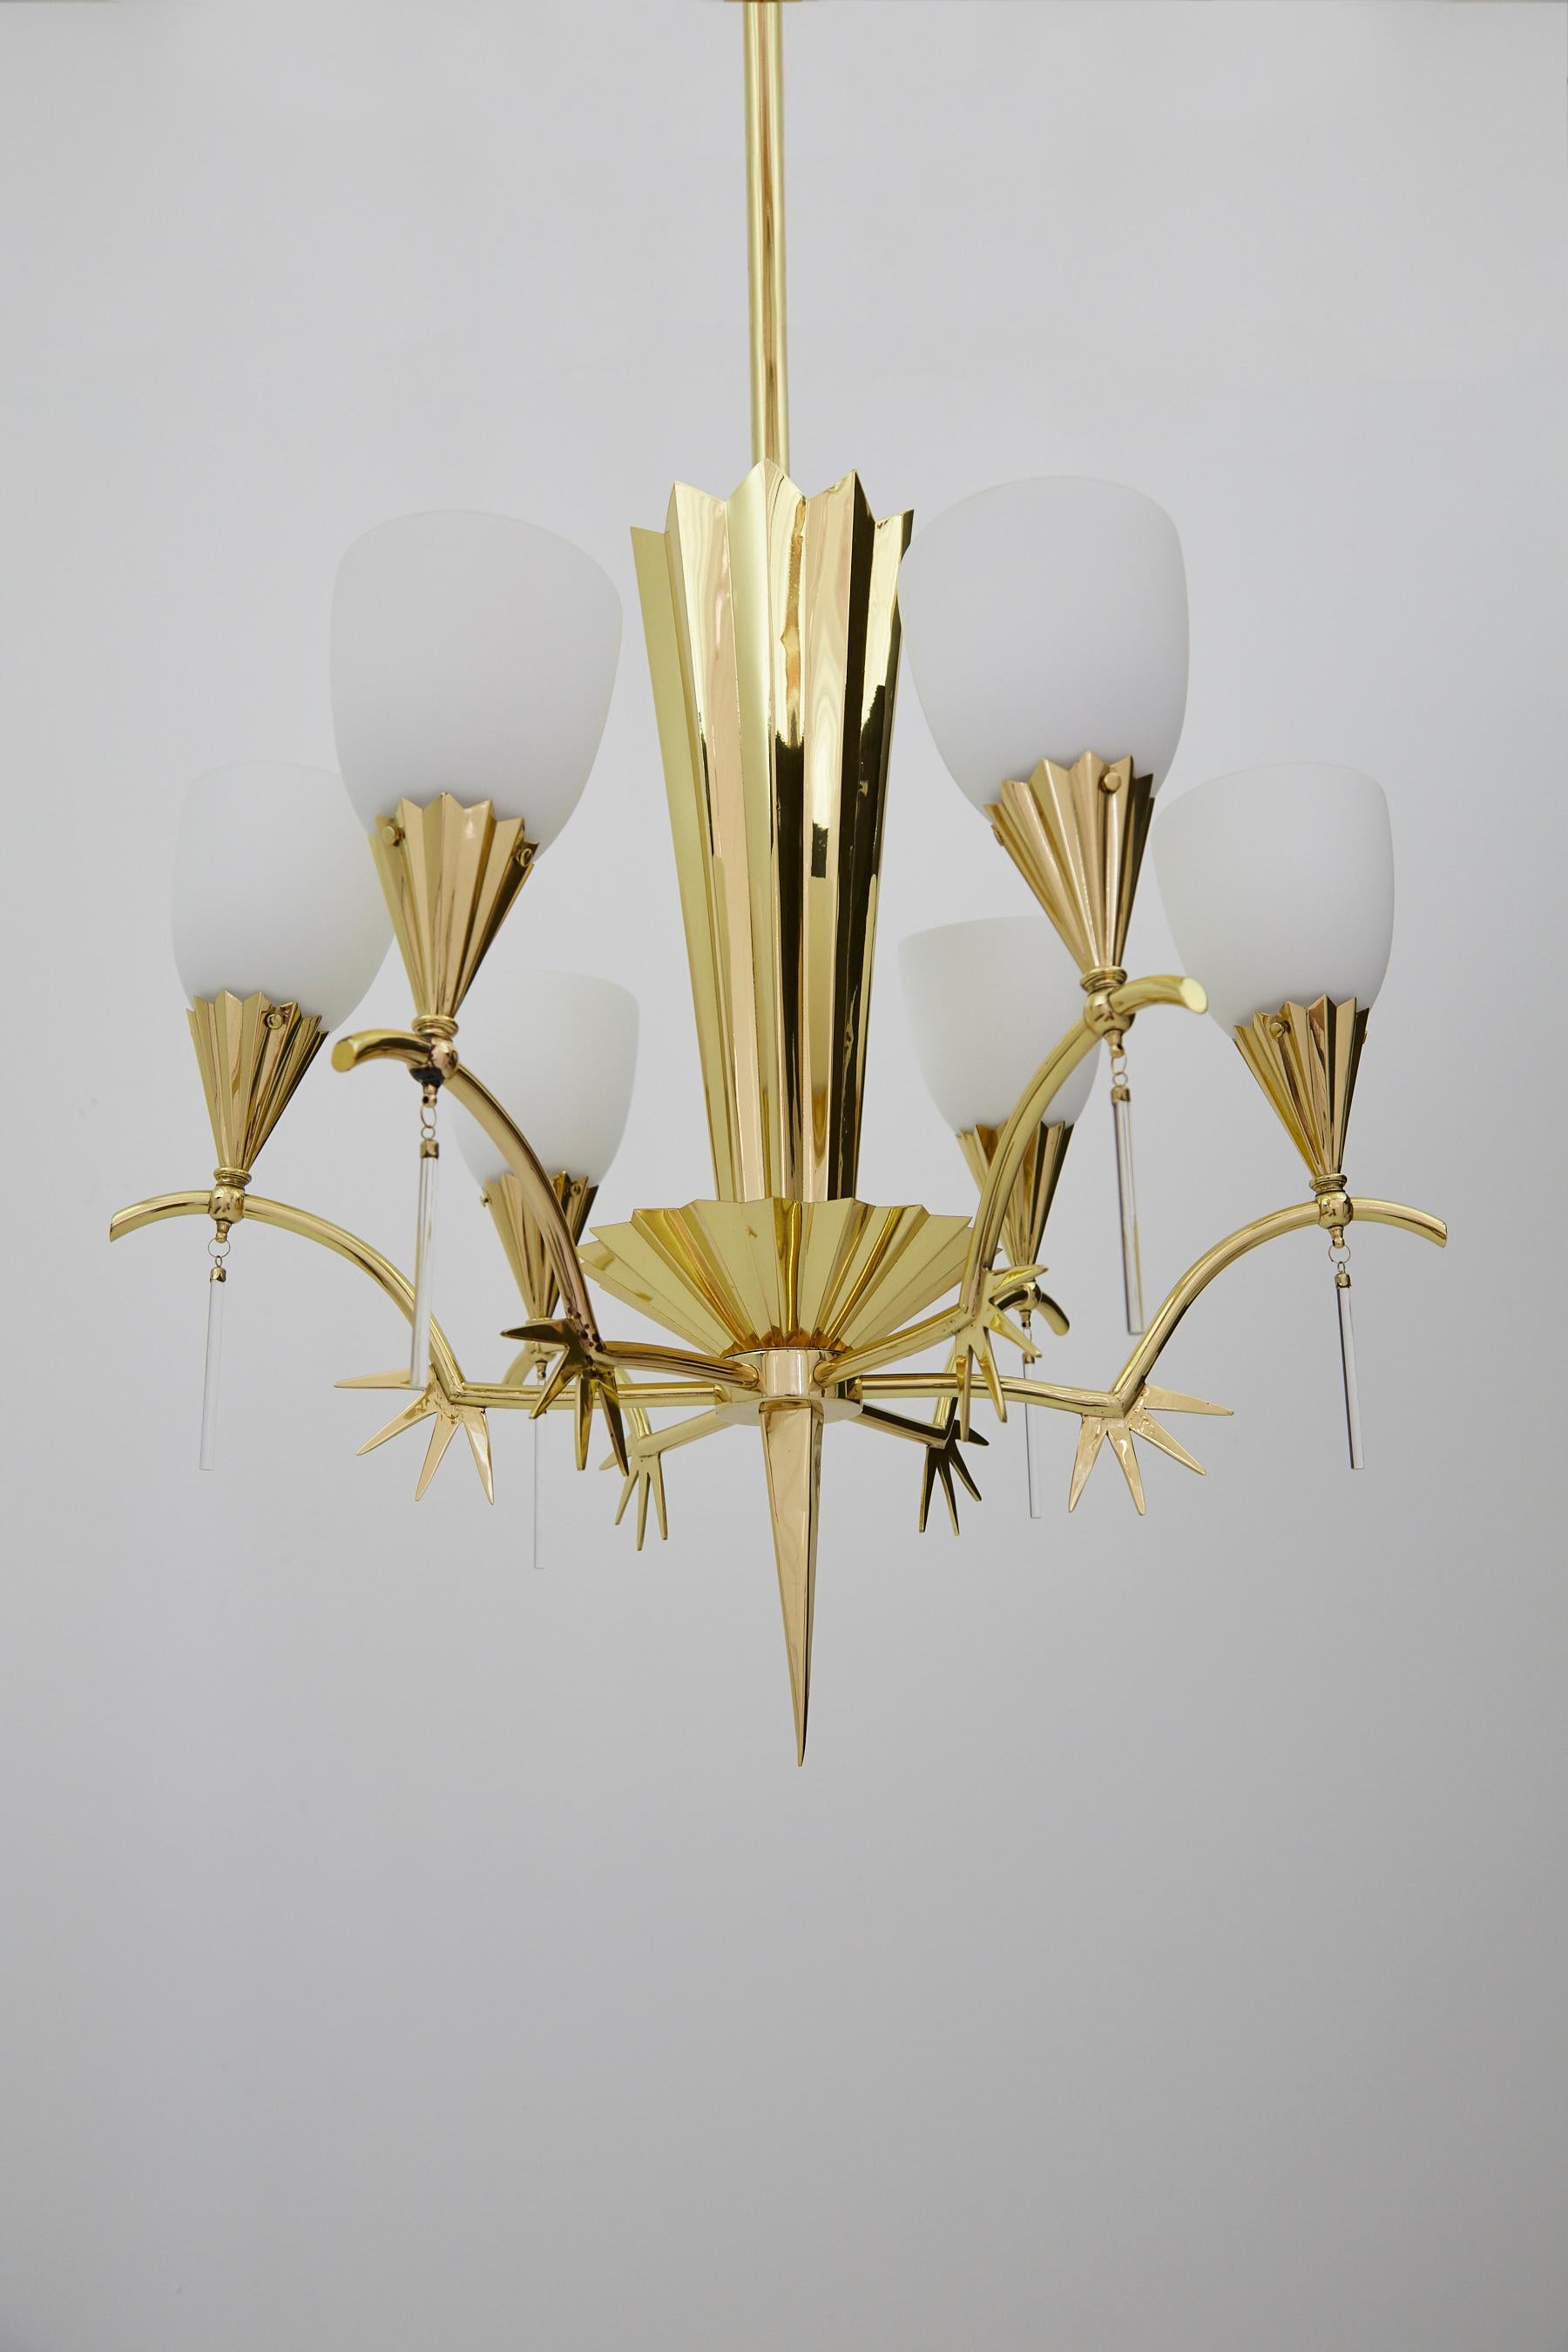 Mid-Century Modern Six-Arm Italian Brass Chandelier with Decorative Spikes, 1940s For Sale